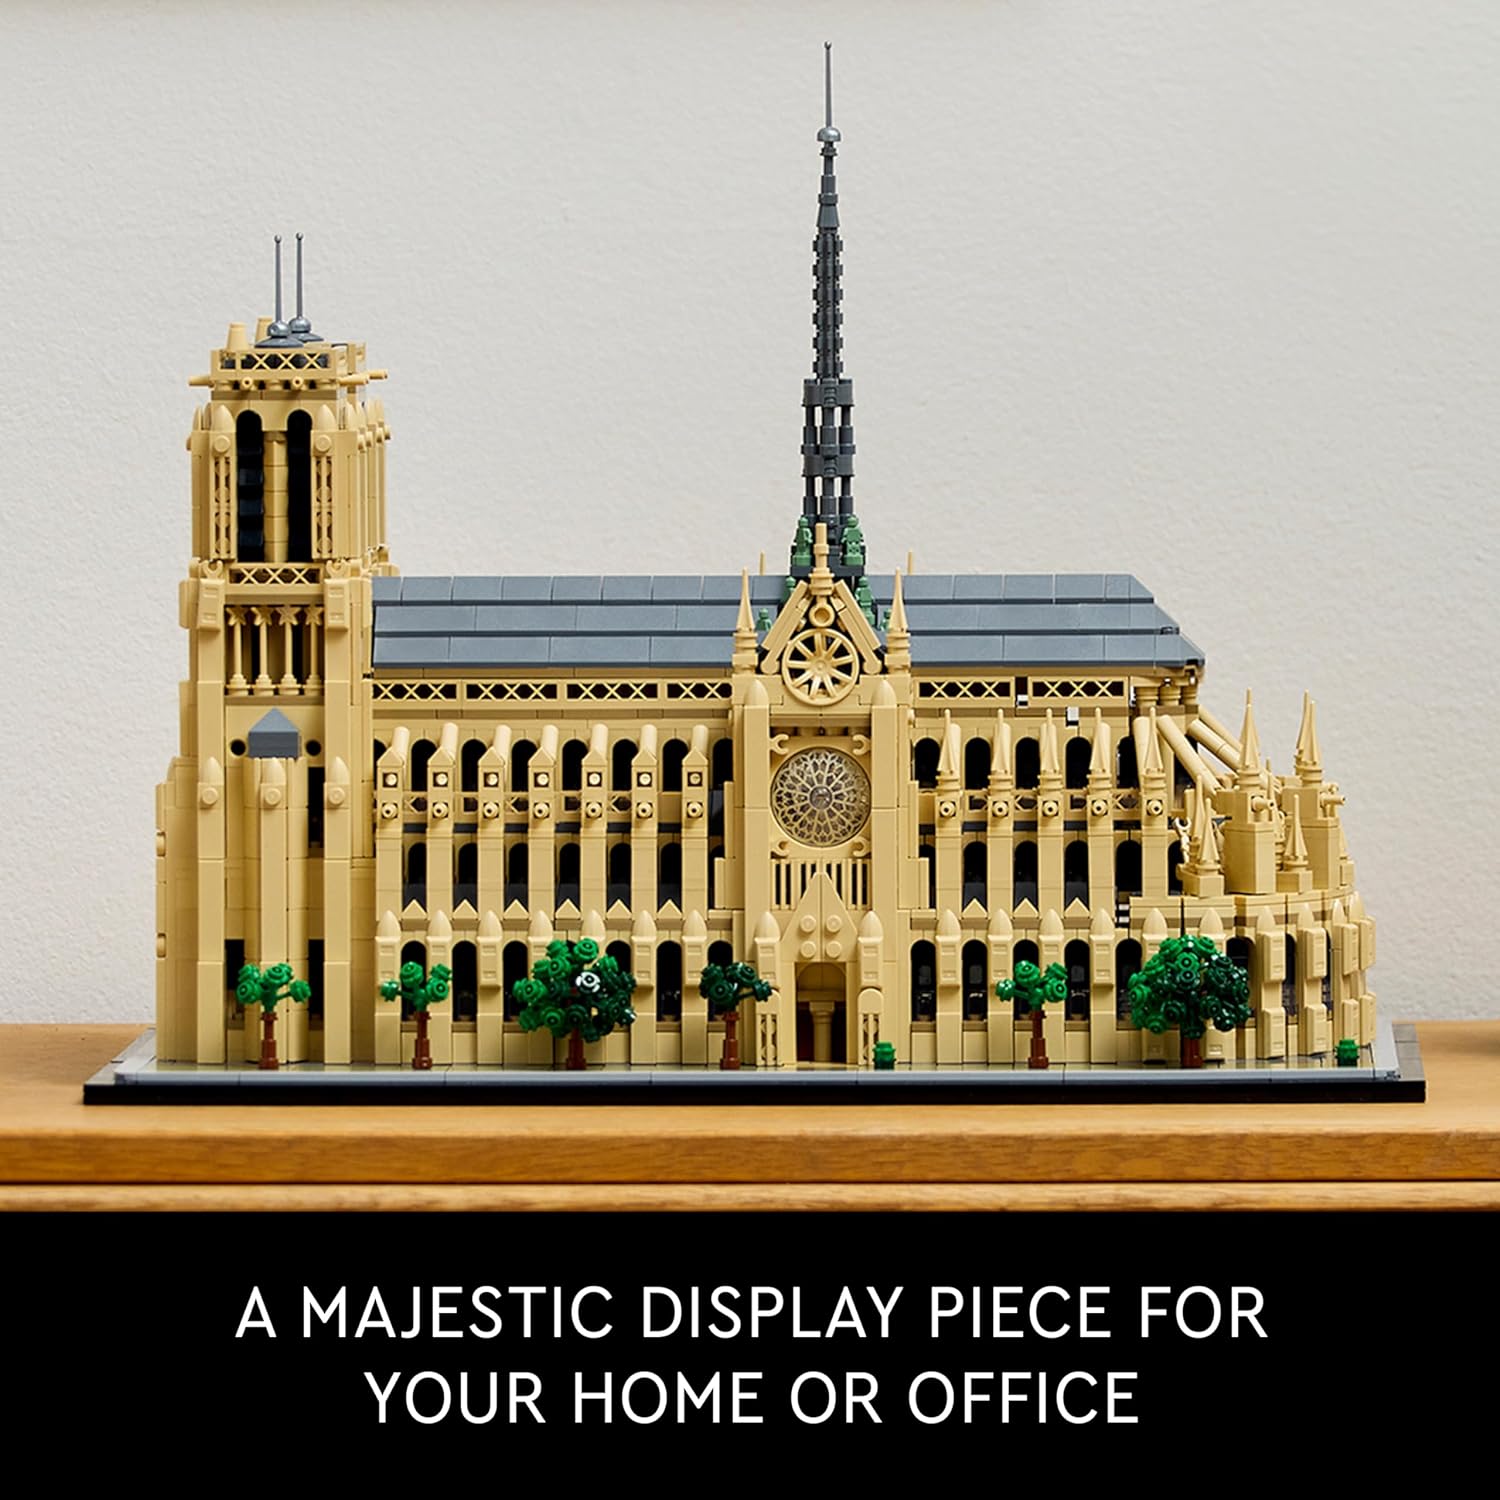 LEGO 21061 Architecture Notre-Dame de Paris Replica, Architectural Model Kit, Collectible Building Set for Adults, Build and Display Souvenir, Graduation Gift Idea for Lovers of History and Travel.